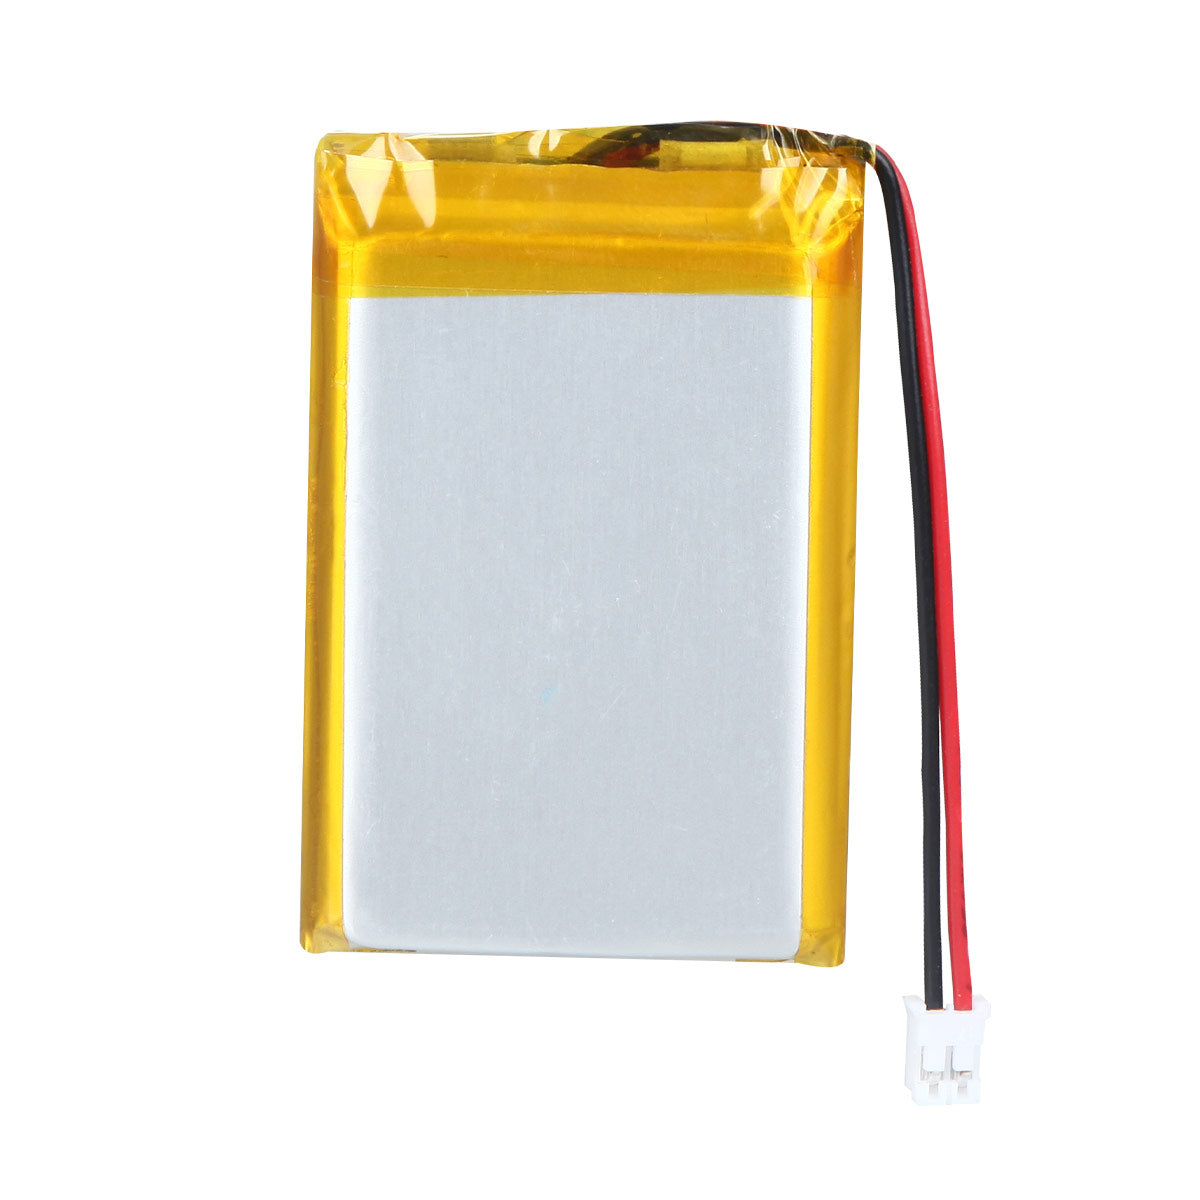 YDL 3.7V 1200mAh 783448 Rechargeable Polymer Lithium-Ion Battery